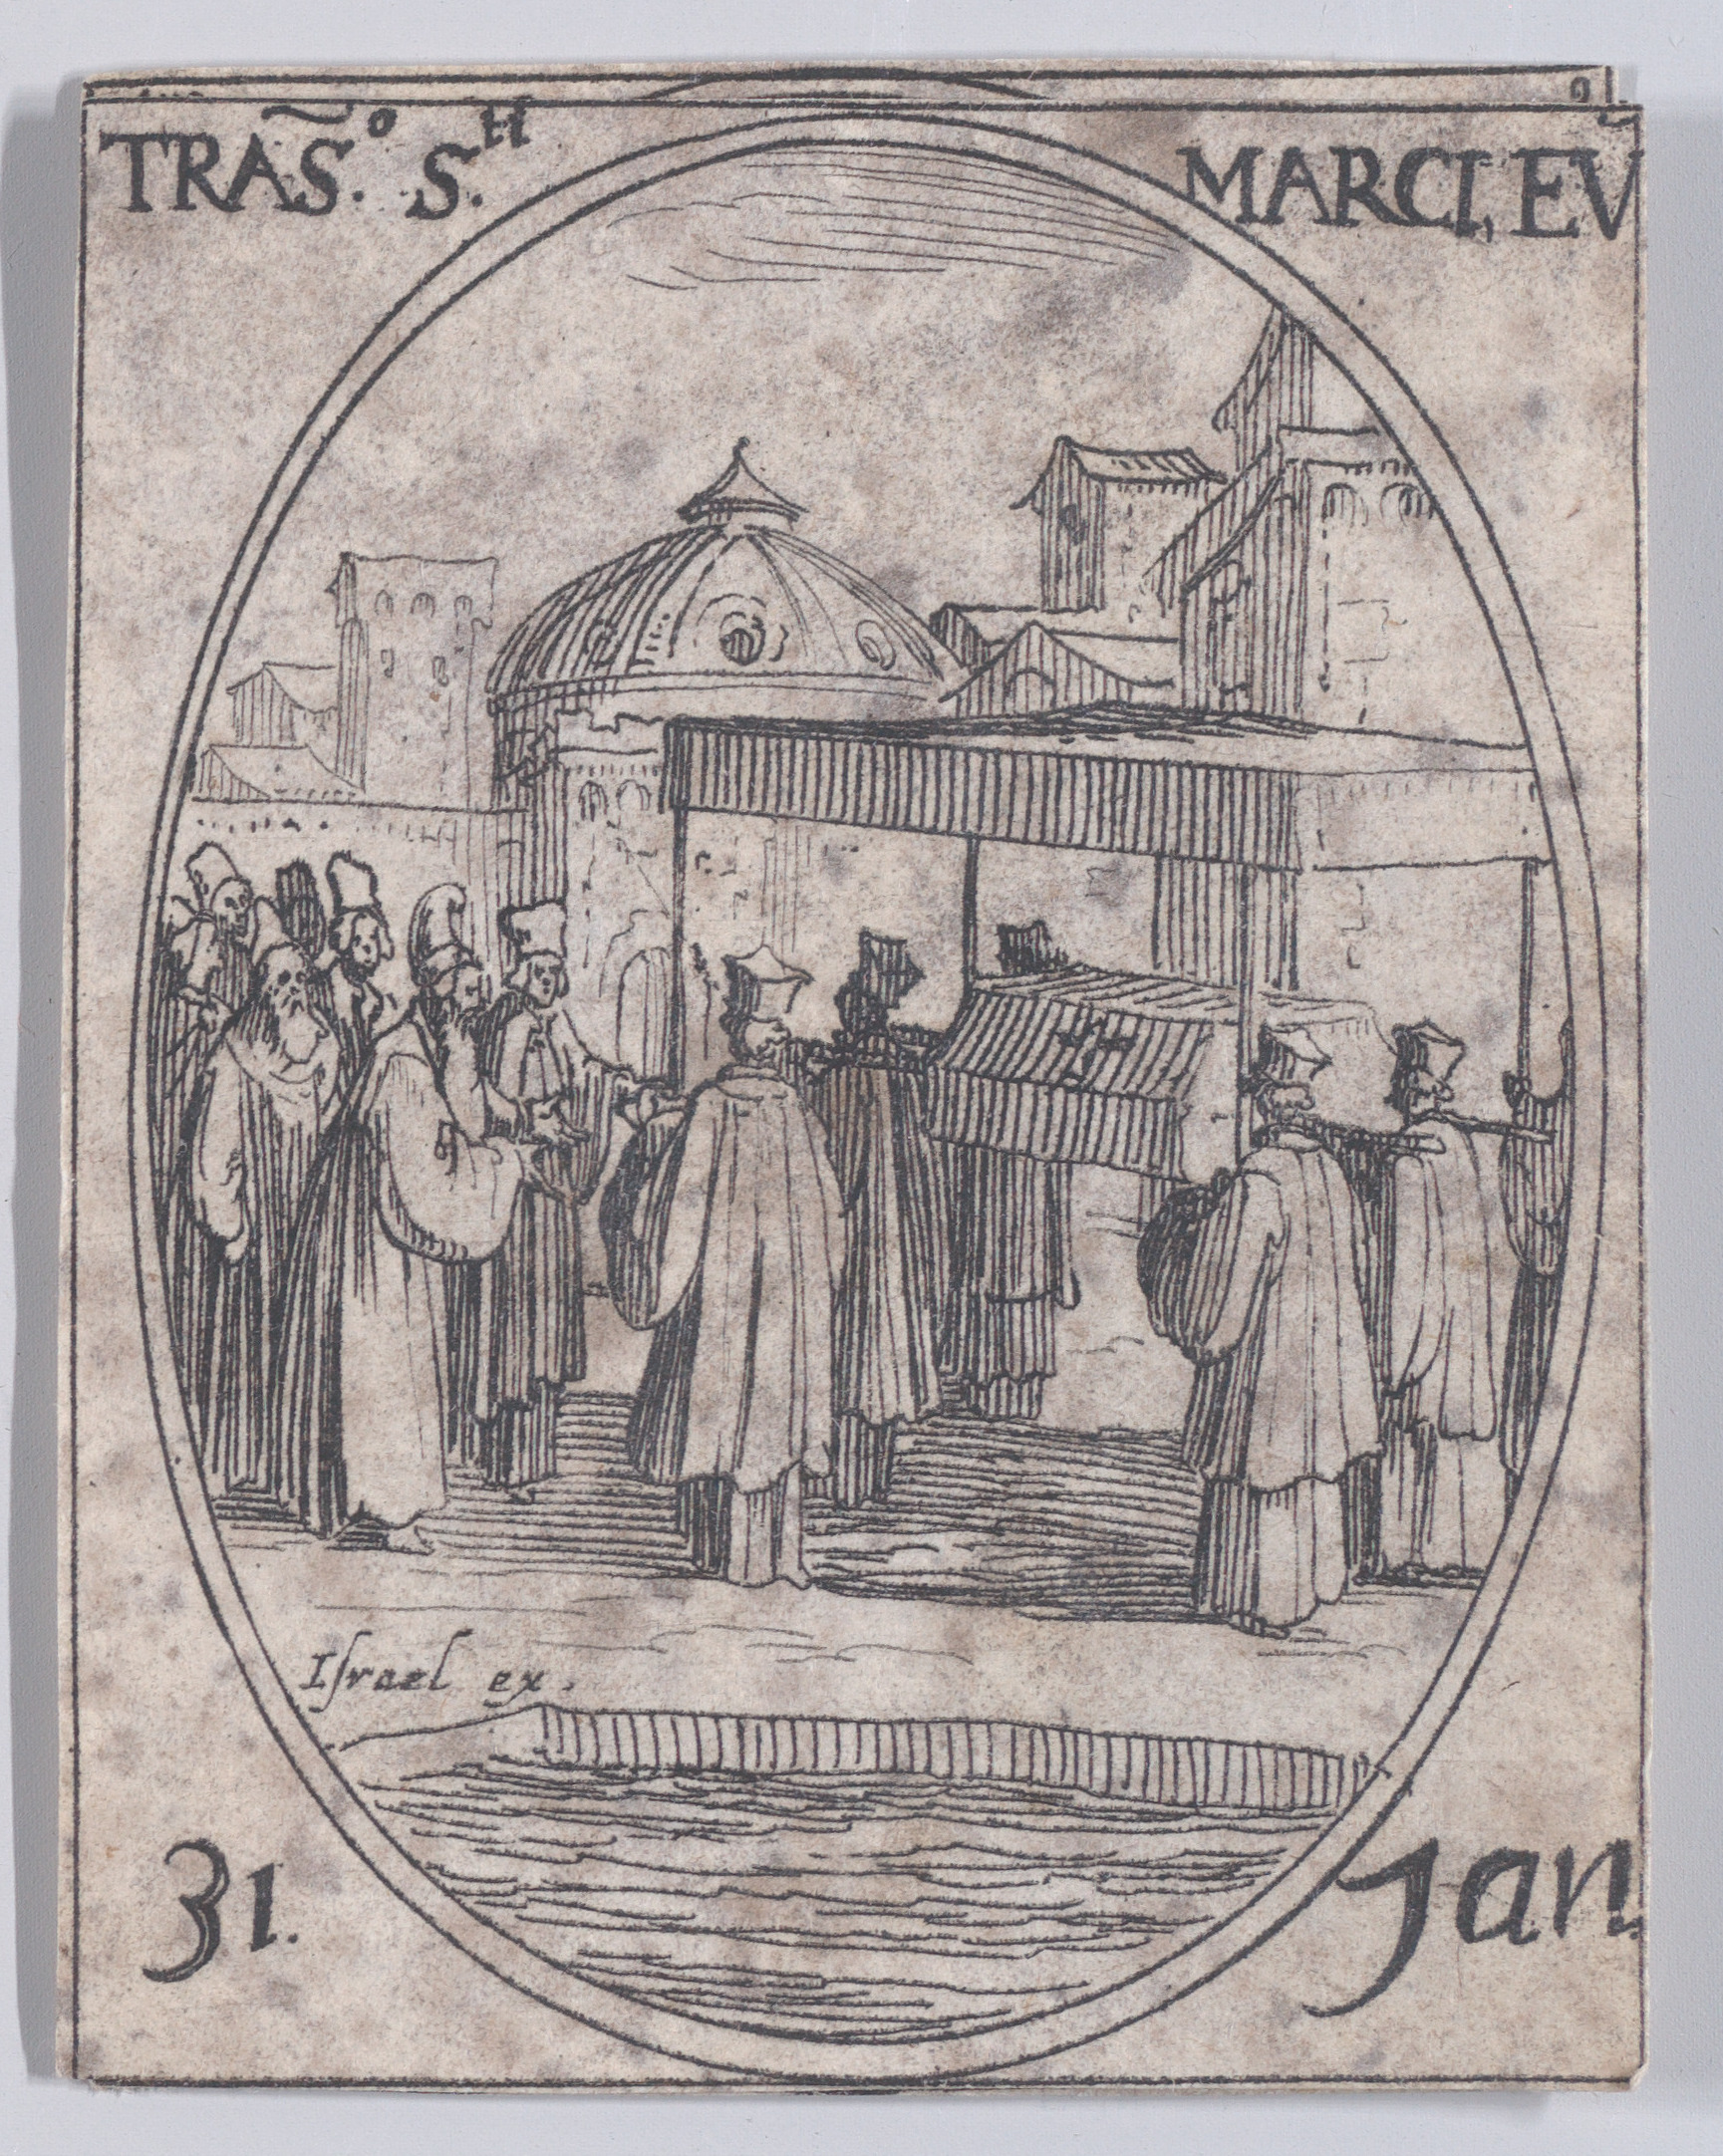 La Translation de St. Marc (The Translation of the Relics of St. Mark), January 31st, from Les Images De Tous Les Saincts et Saintes de L'Année (Images of All of the Saints and Religious Events of the Year), Jacques Callot (French, Nancy 1592–1635 Nancy), Etching; second state of two (Lieure)